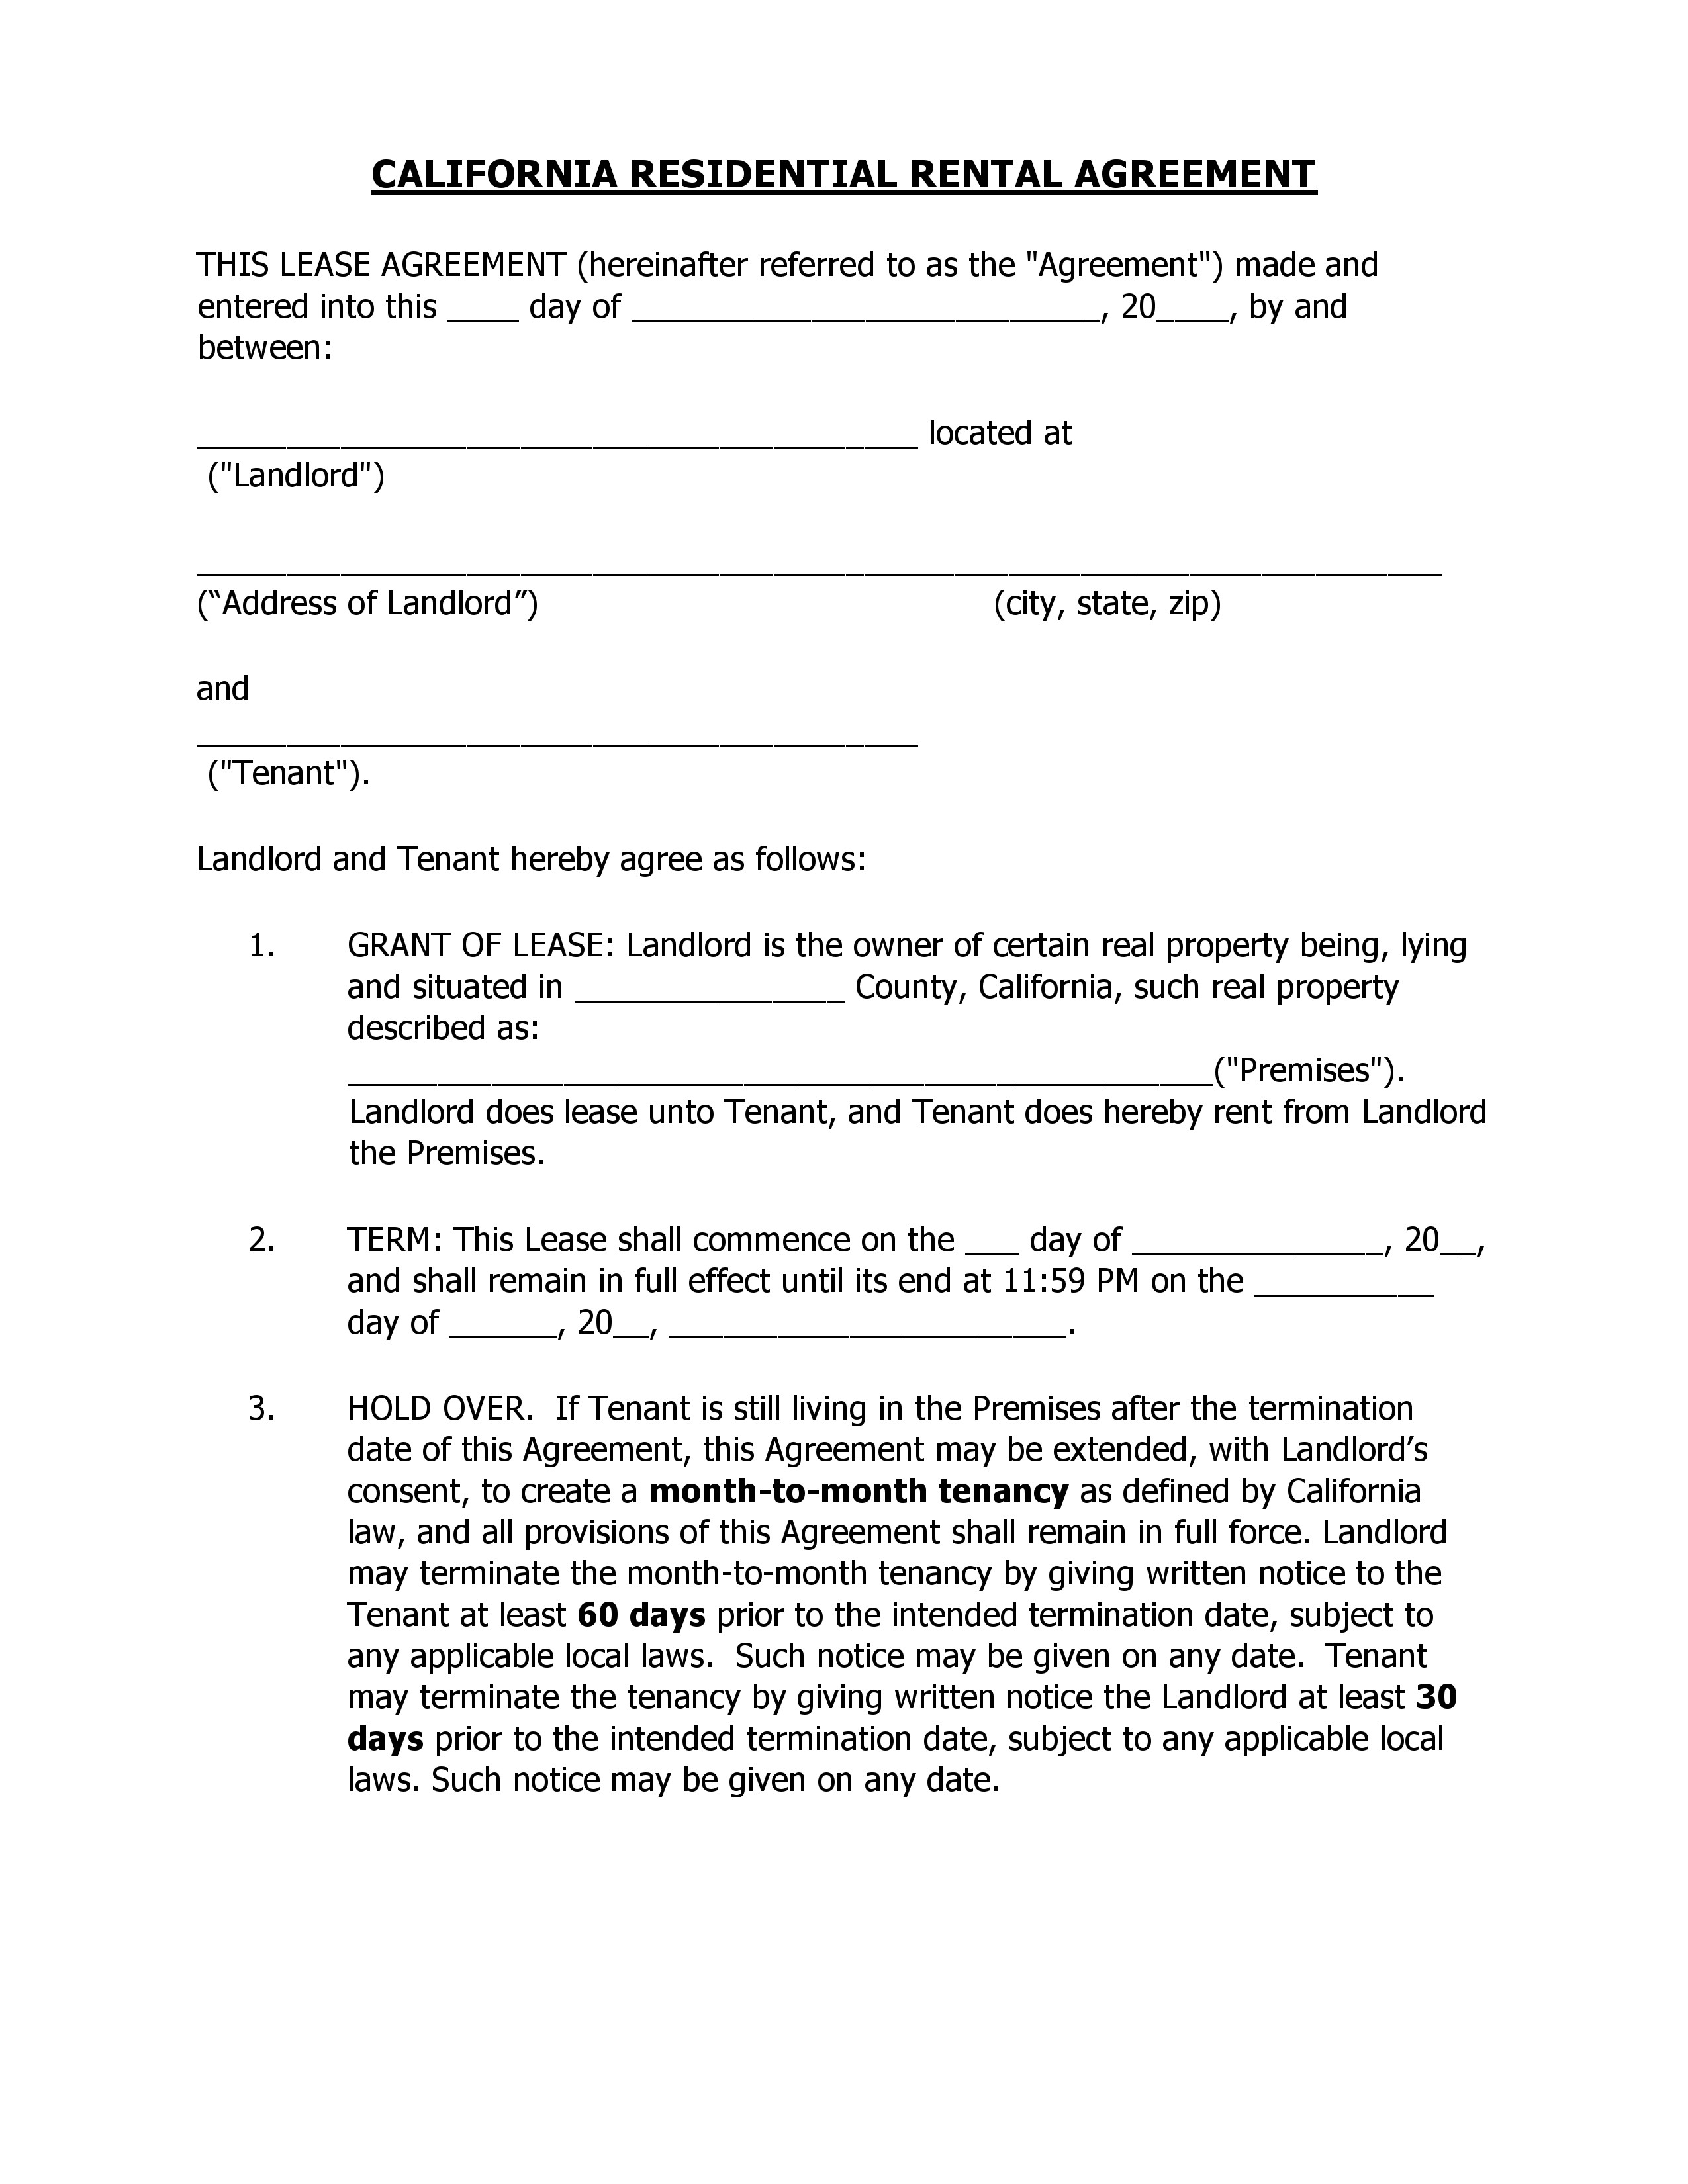 house lease agreement